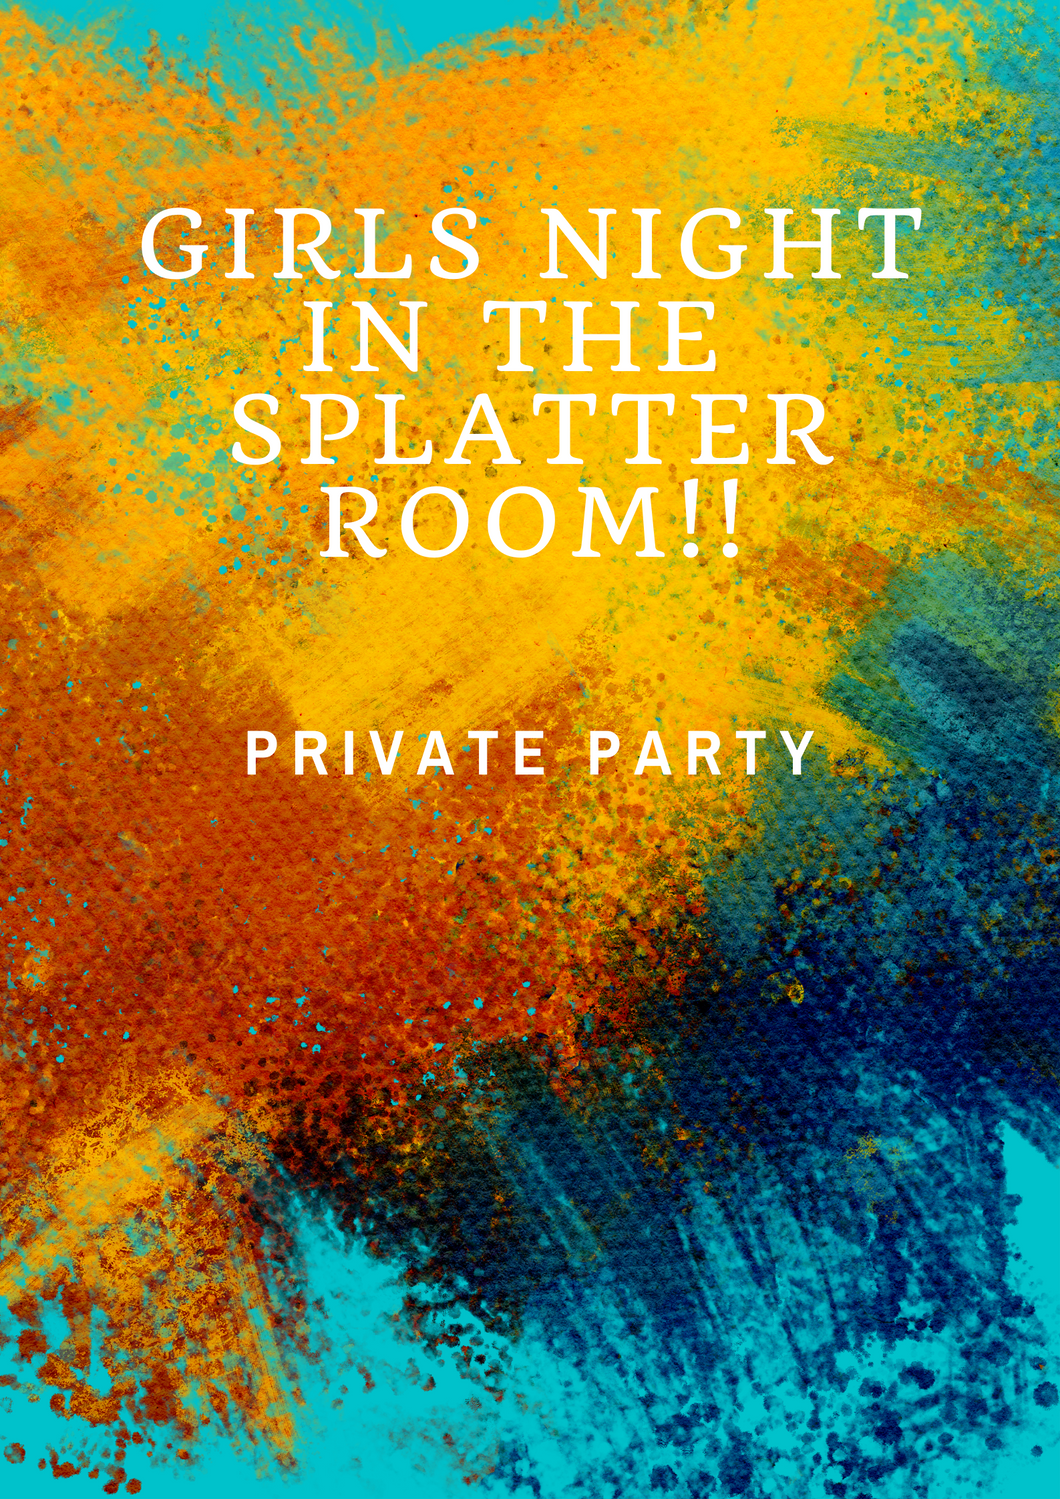 Girls Night in the Splatter Room painting done at Uptown Paint and Sip in Jupiter, FL - Painting Classes for Girls Night Out Ideas and Date Night